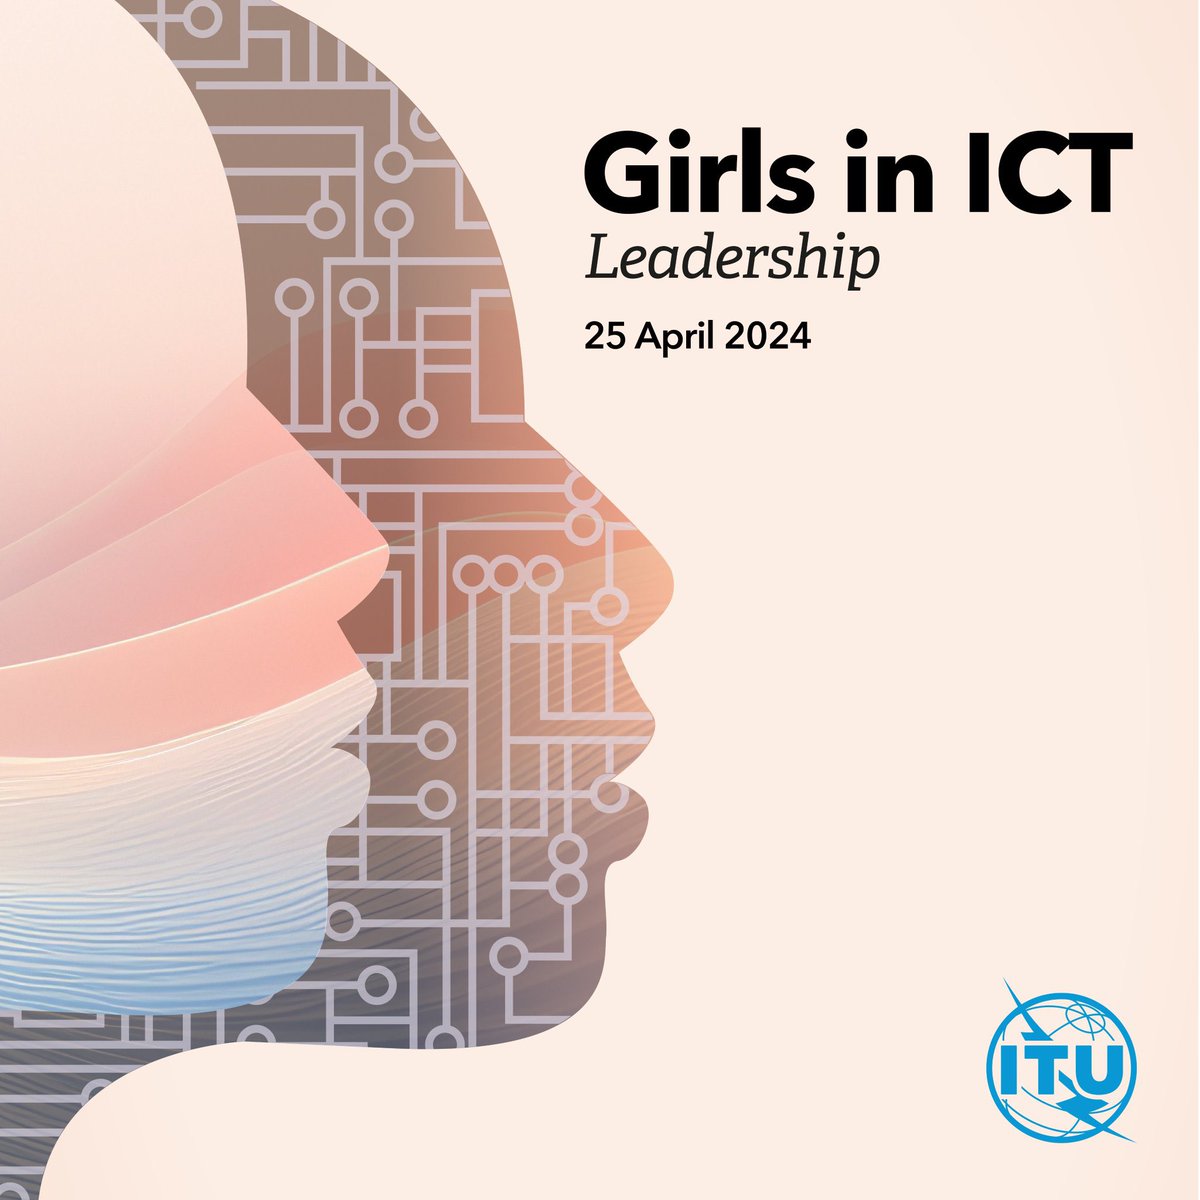 On International #GirlsInICT Day, Ambassador Pipan joined colleagues & @ITU in celebrating women leadership in tech. 🇸🇮 is dedicated to bridging the gender gap in ICT, incl. through the 2030 digital strategy that aims to increase share of women ICT professionals to 25% by 2030.